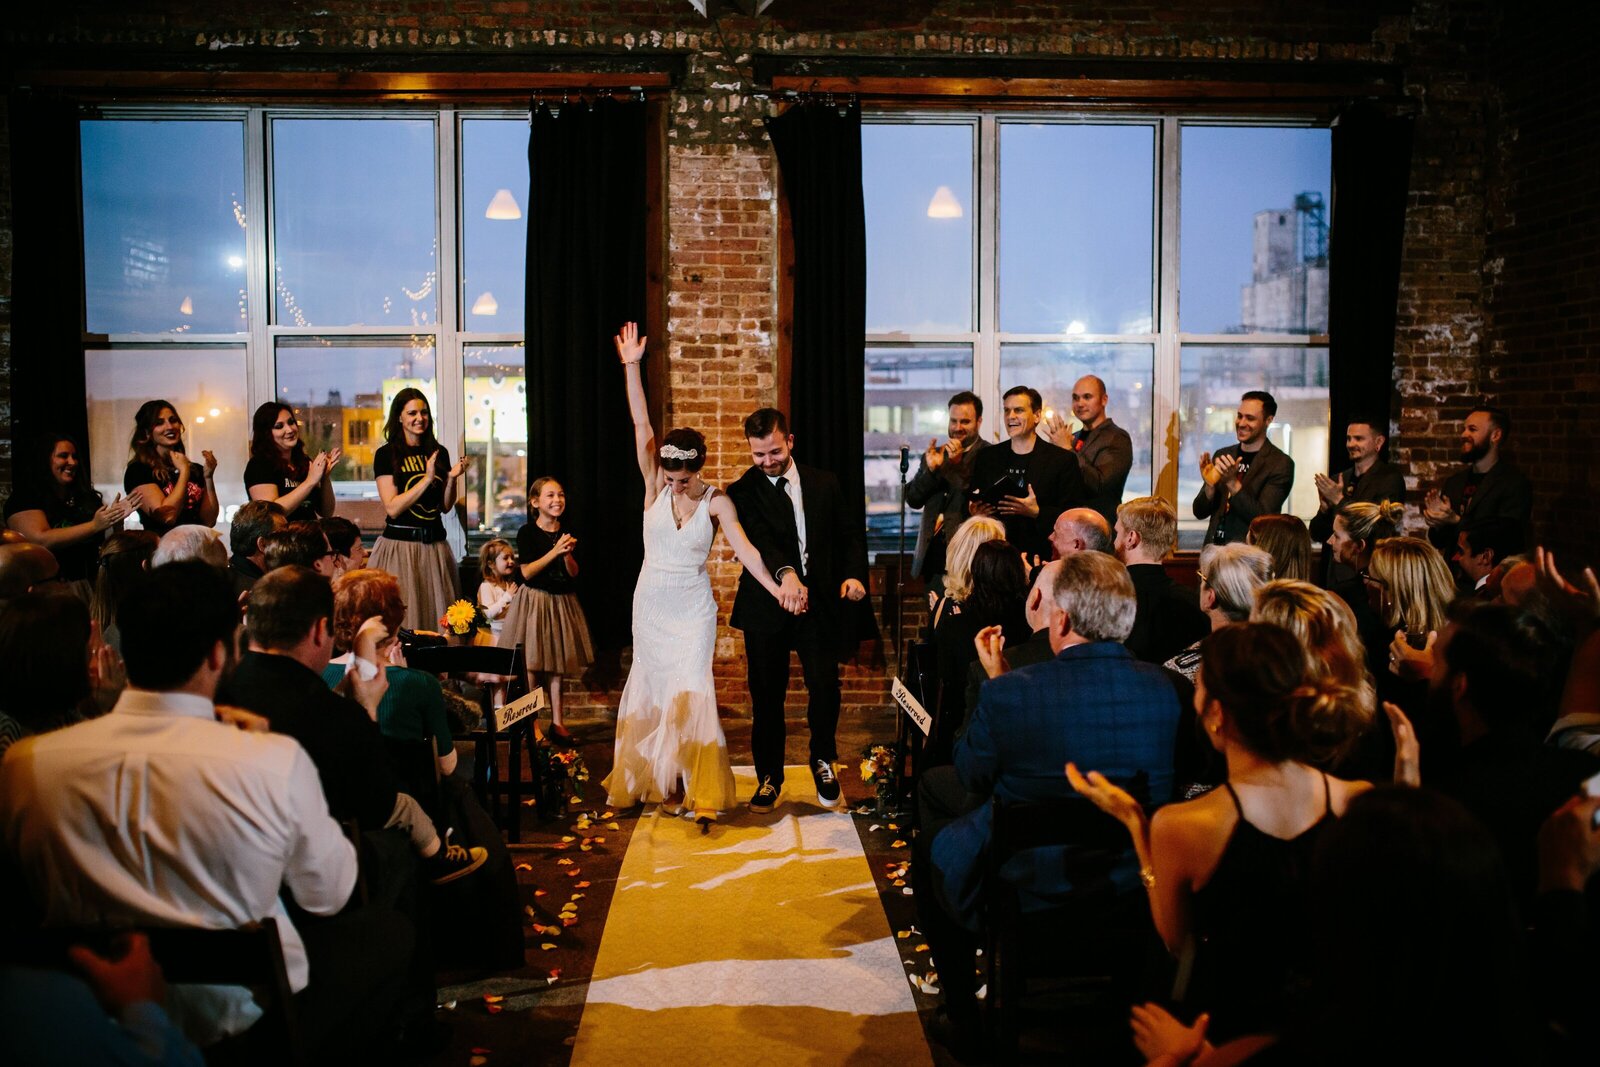 Bride and groom raise their arms and cheer after taking their wedding vows